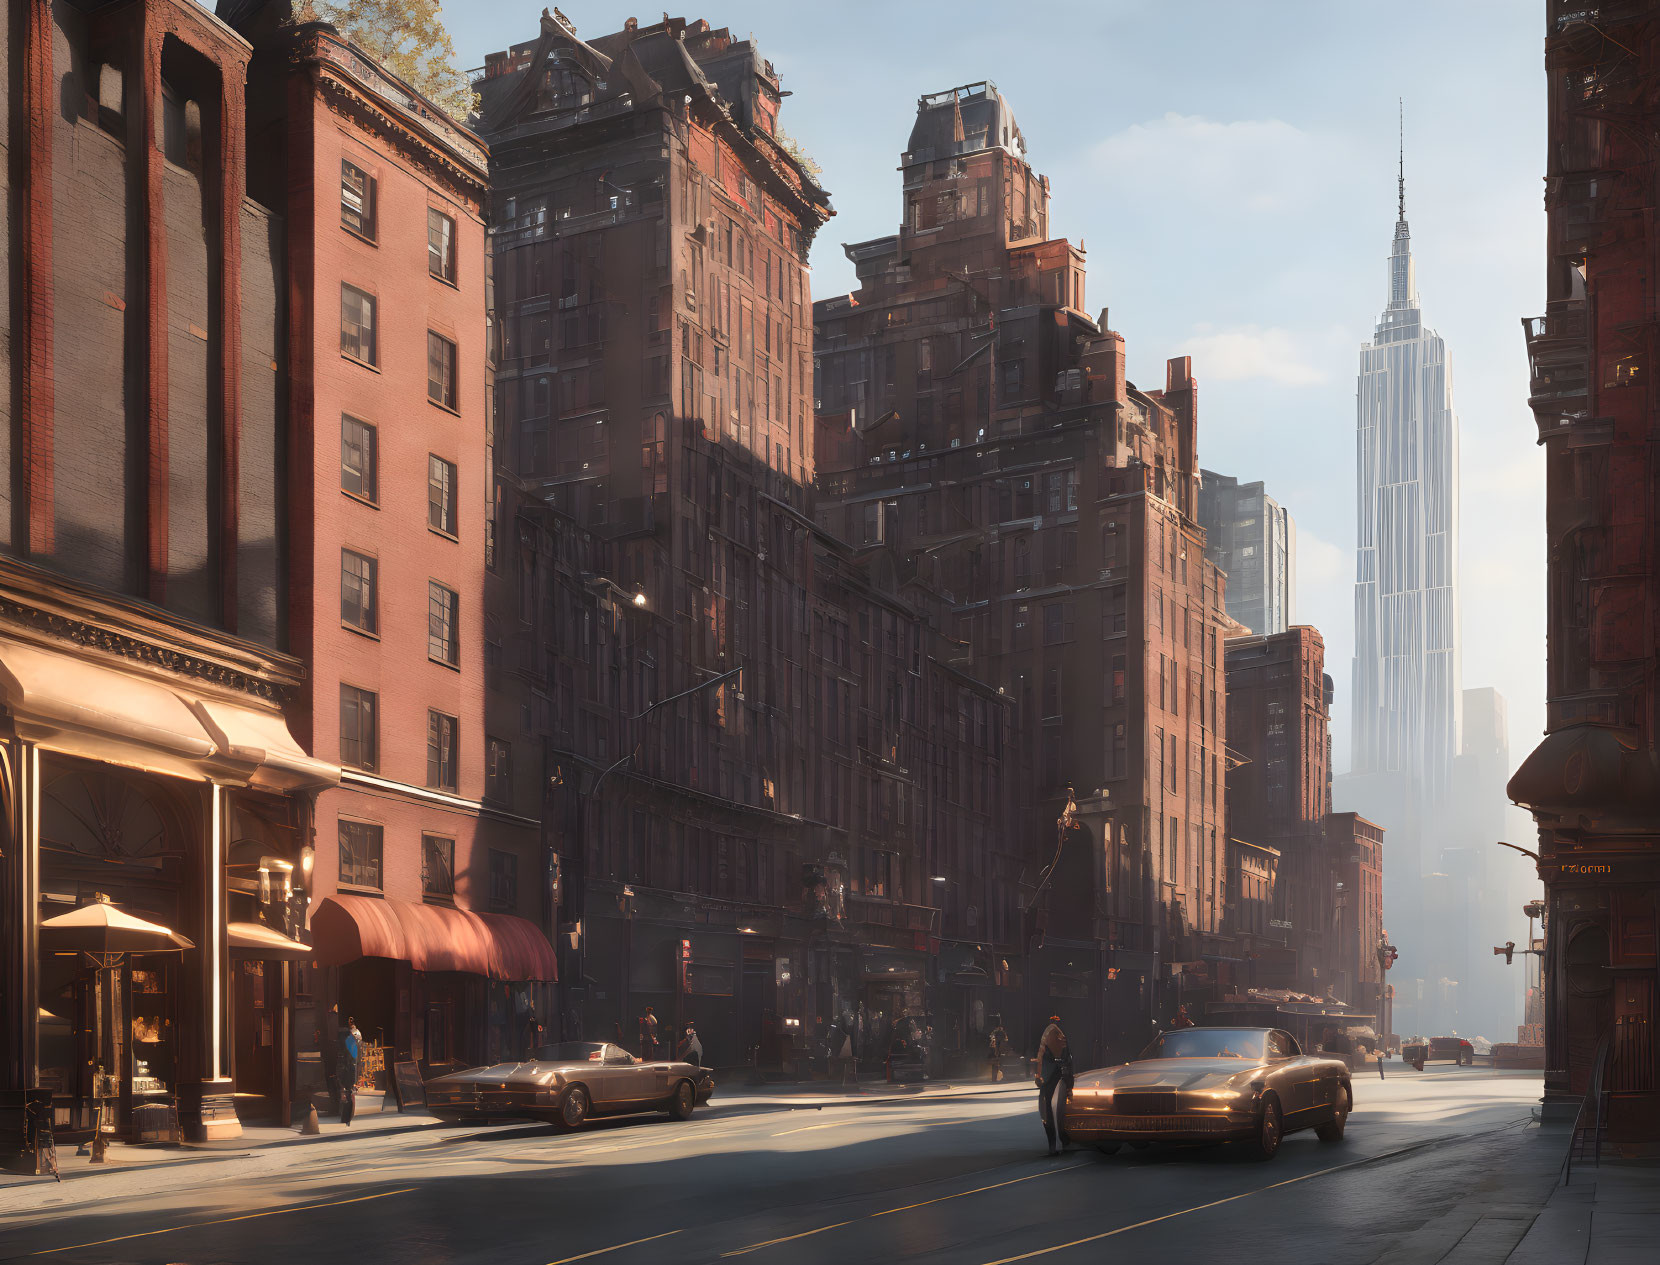 Vintage cars and Empire State Building in New York street scene.